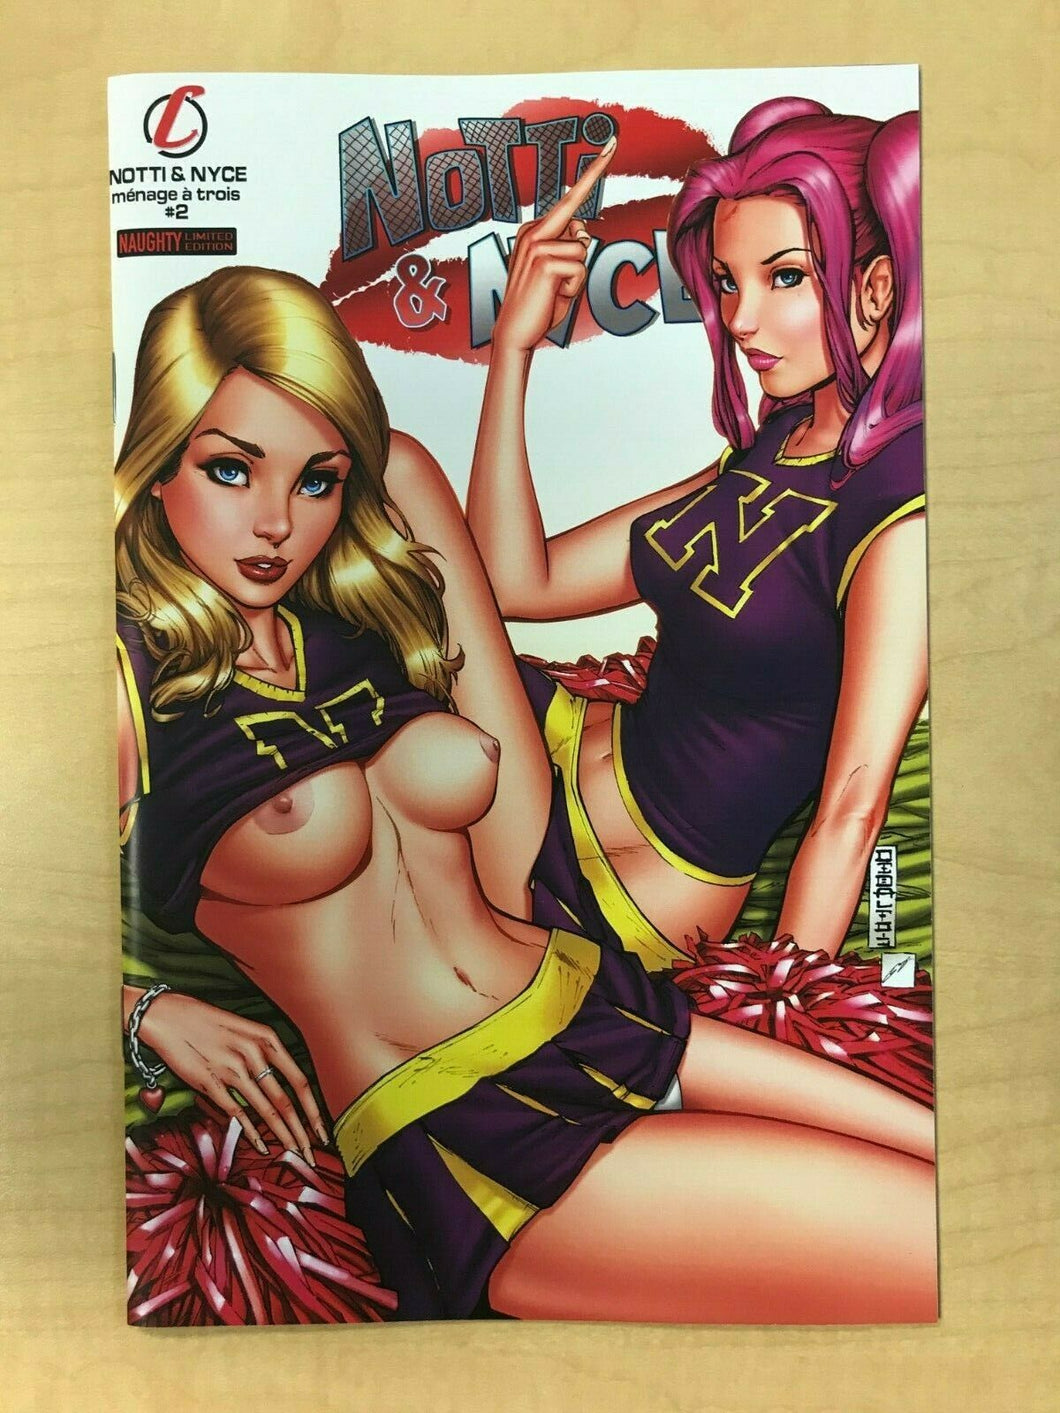 Notti & Nyce Menage A Trois #2 NAUGHTY TOPLESS Variant Cover MIKE DEBALFO